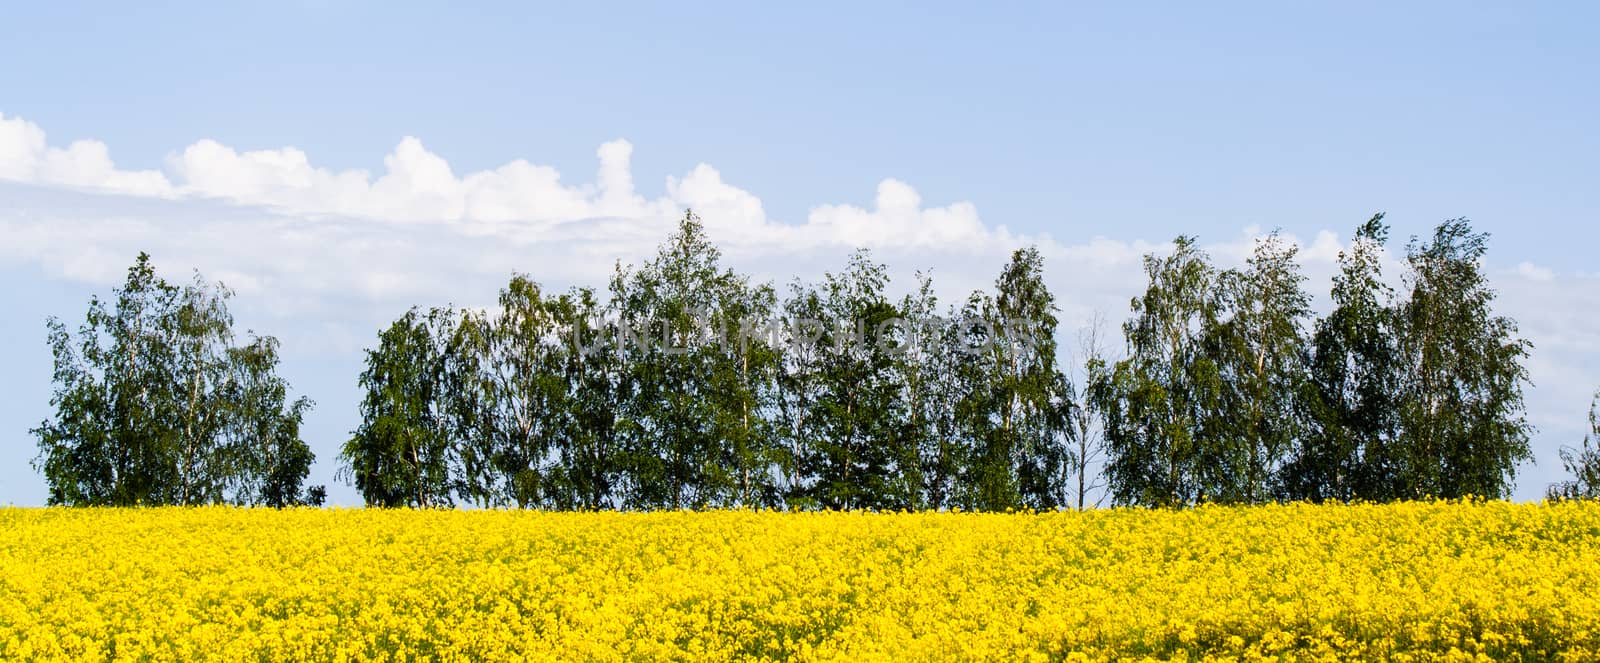 Beautiful field of bright yellow rape with trees in background Rapeseed flowers against blue sky with clouds. Growing seed crops. Rapeseed oil. Spring, sunny landscape in Belarus. Banner for web site